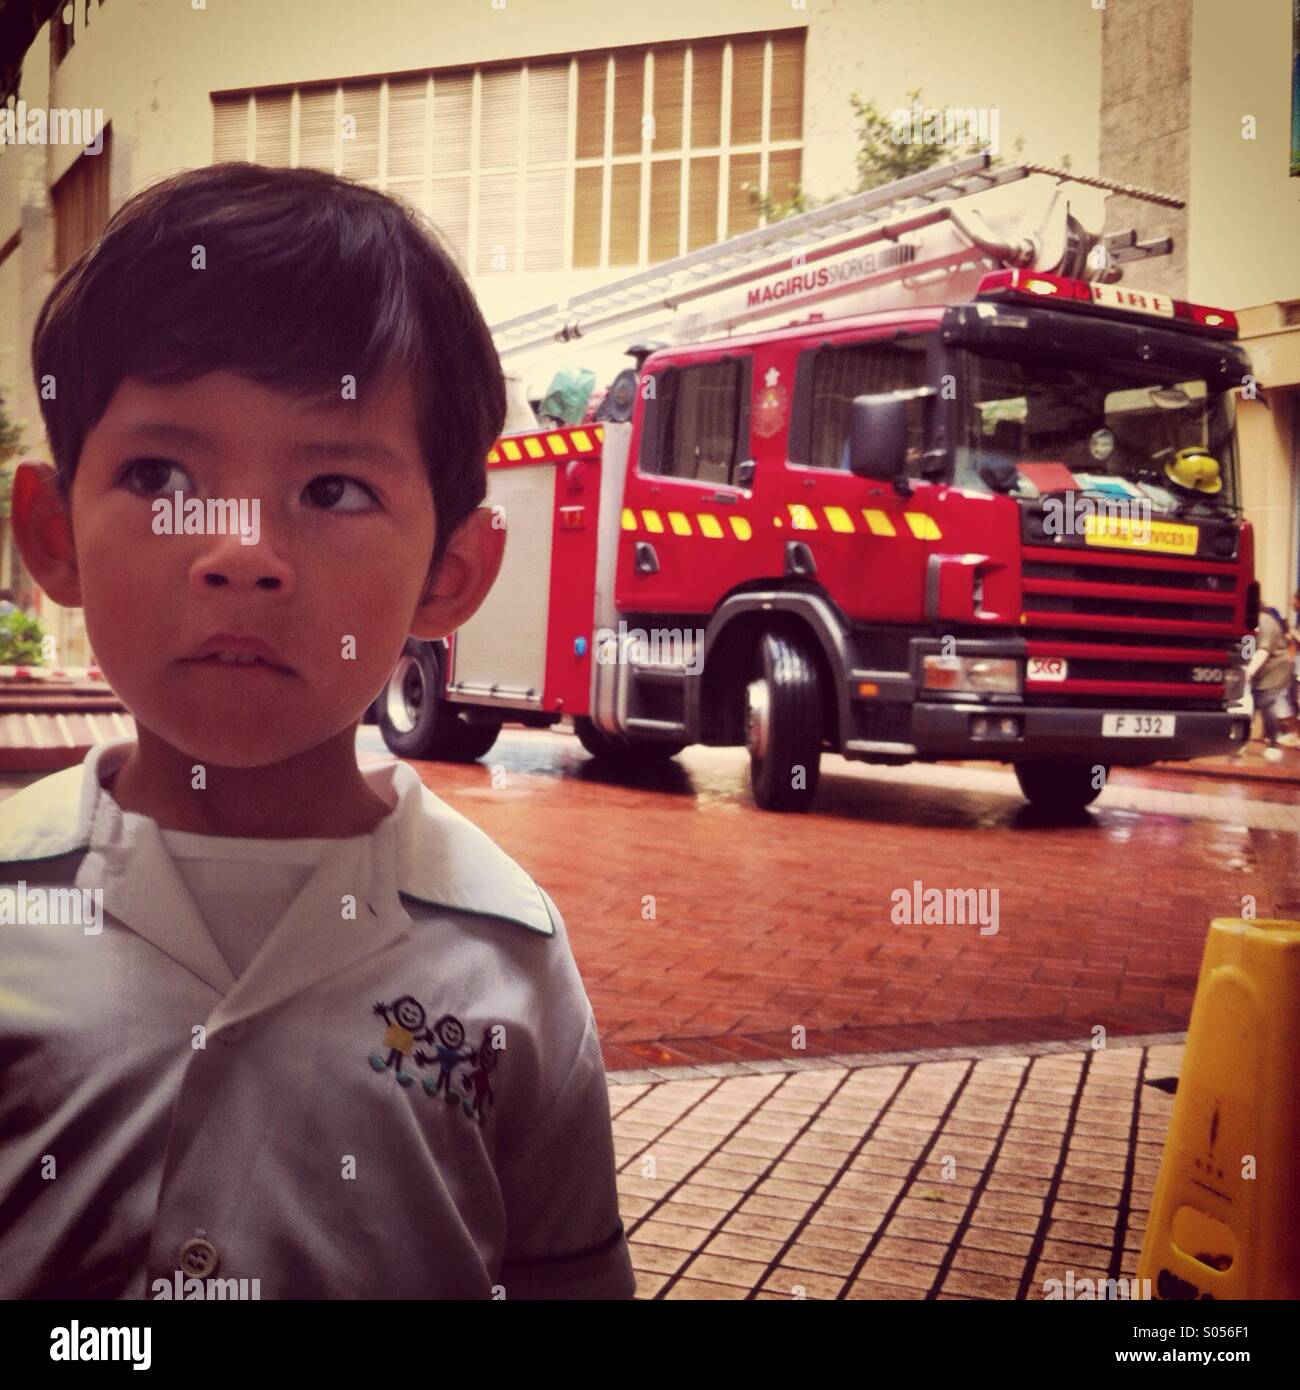 It's a photo of a child who is worry because of the firemen intervention with their firetruck Stock Photo